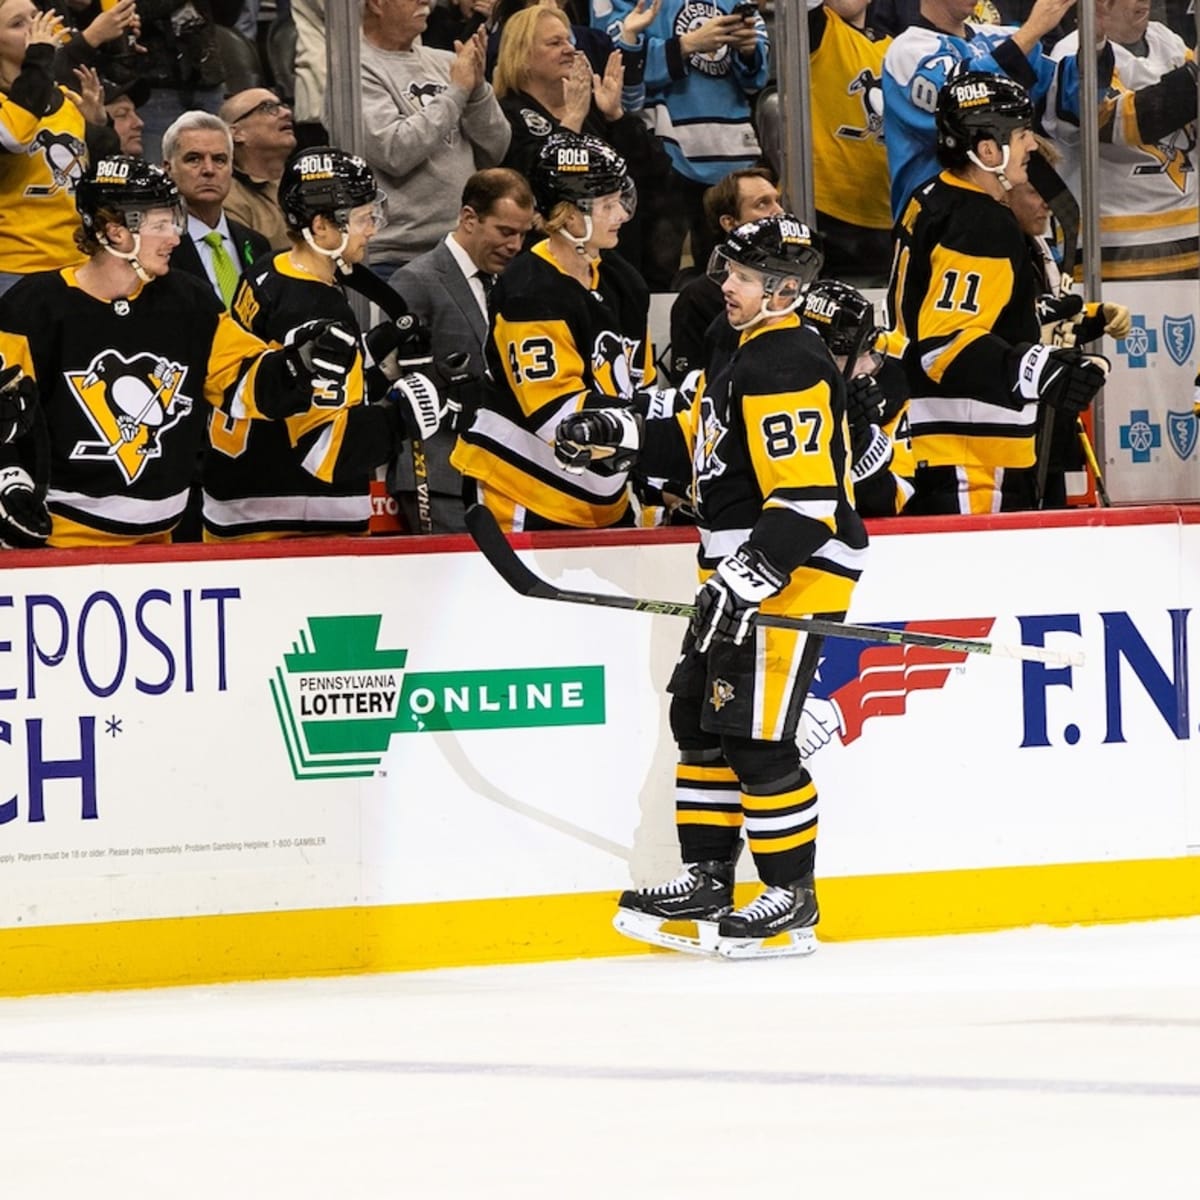 Penguins announce 2022-23 schedule highlighted by Winter Classic